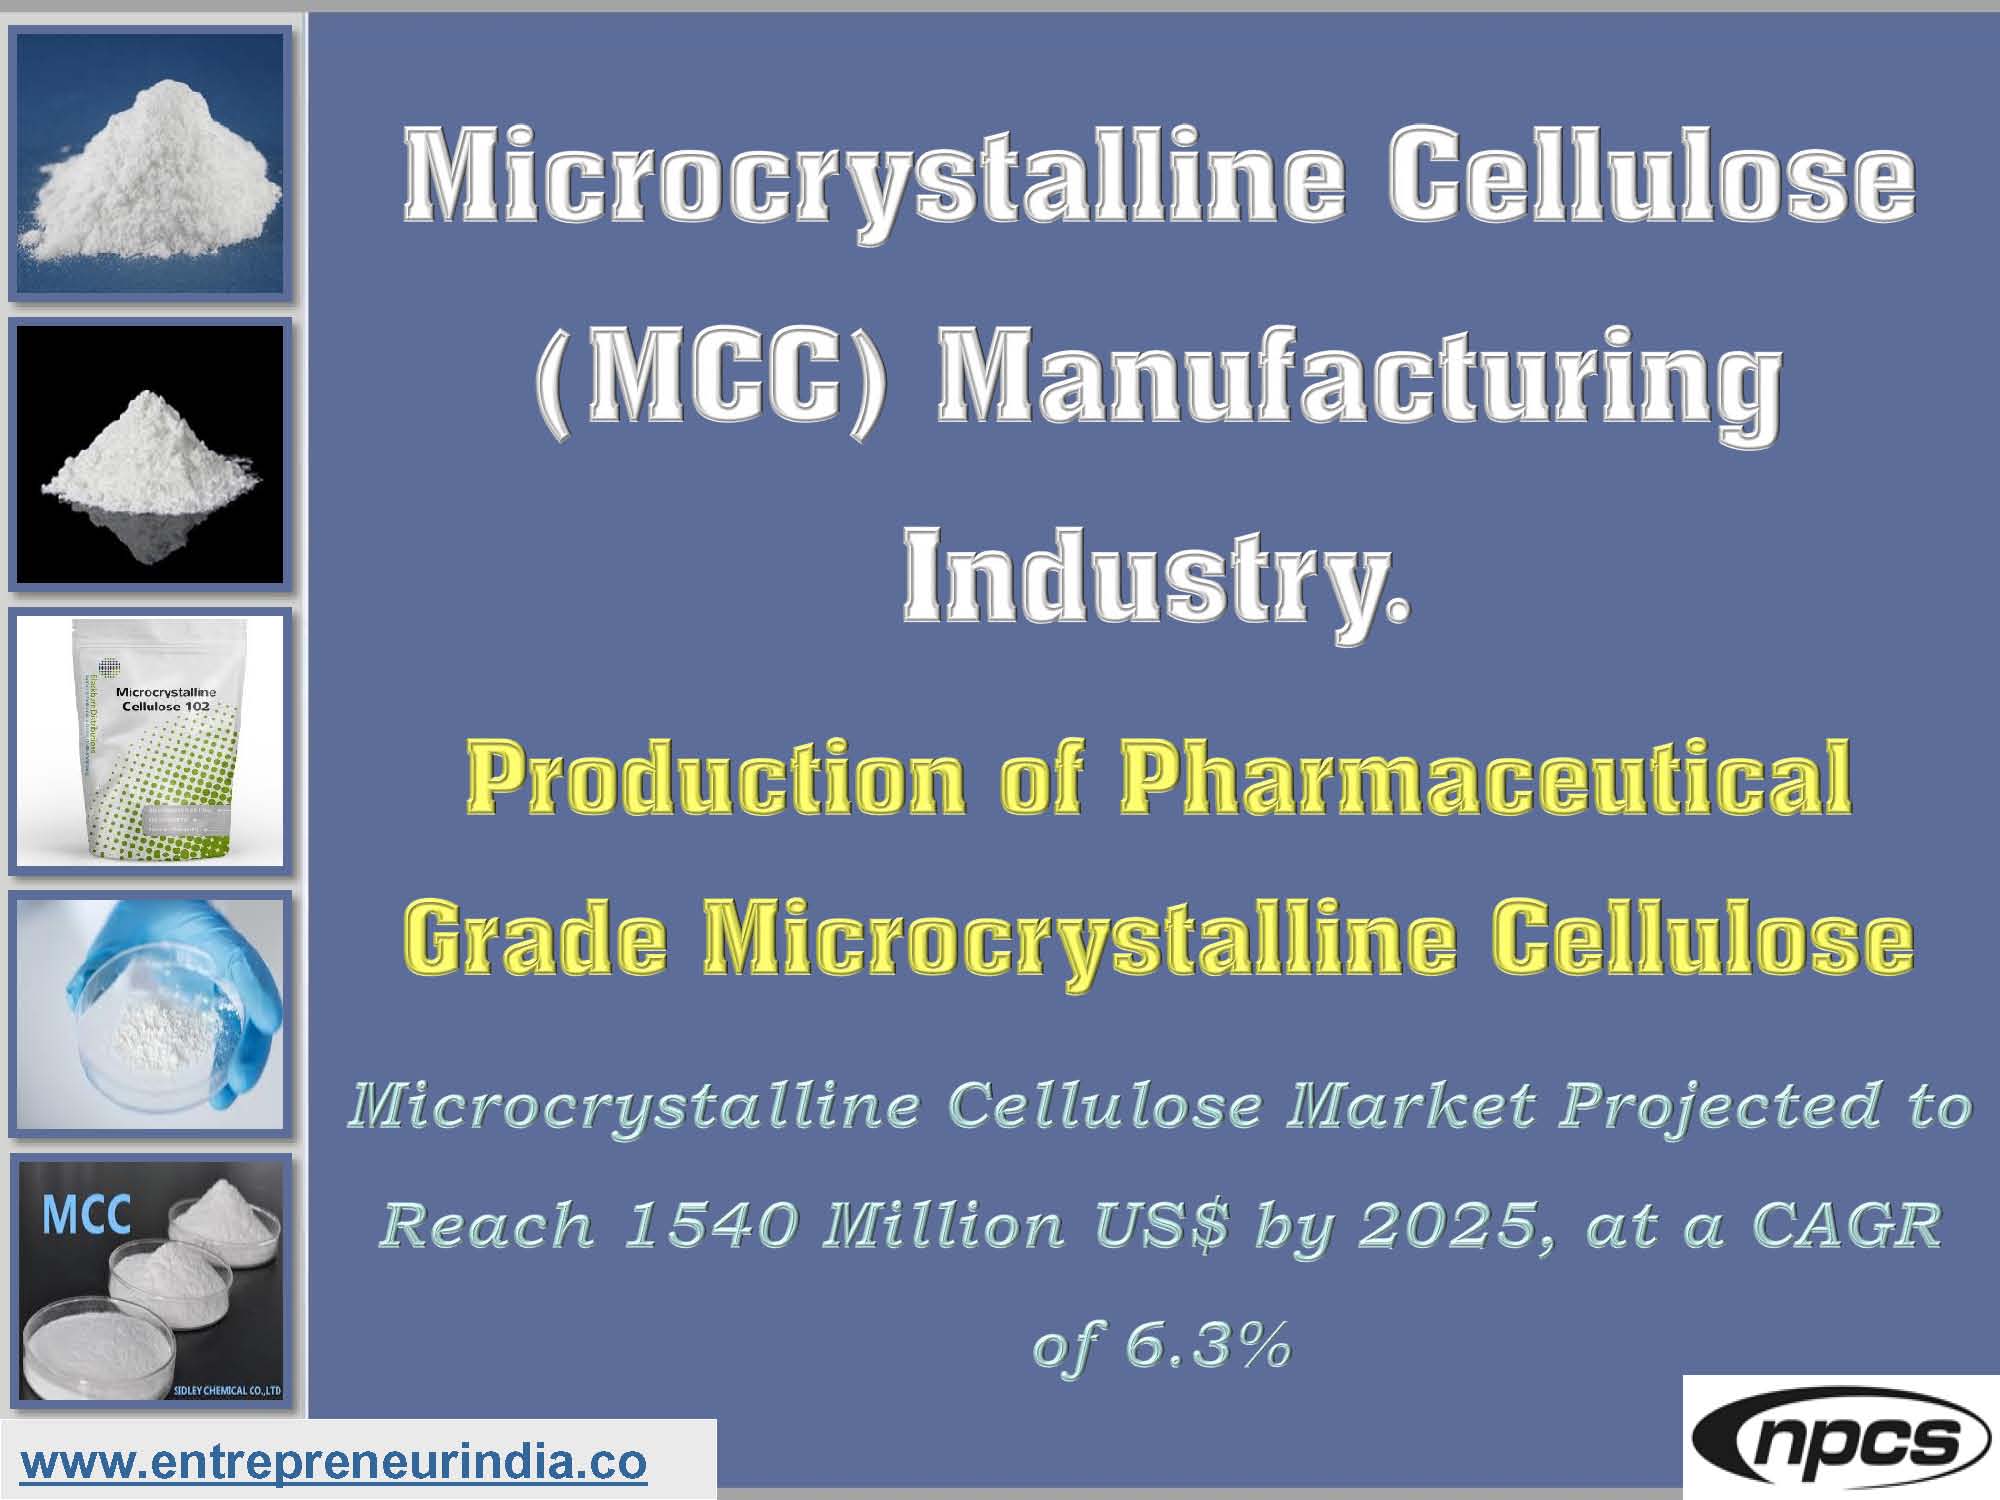 Microcrystalline Cellulose (MCC) Manufacturing Industry